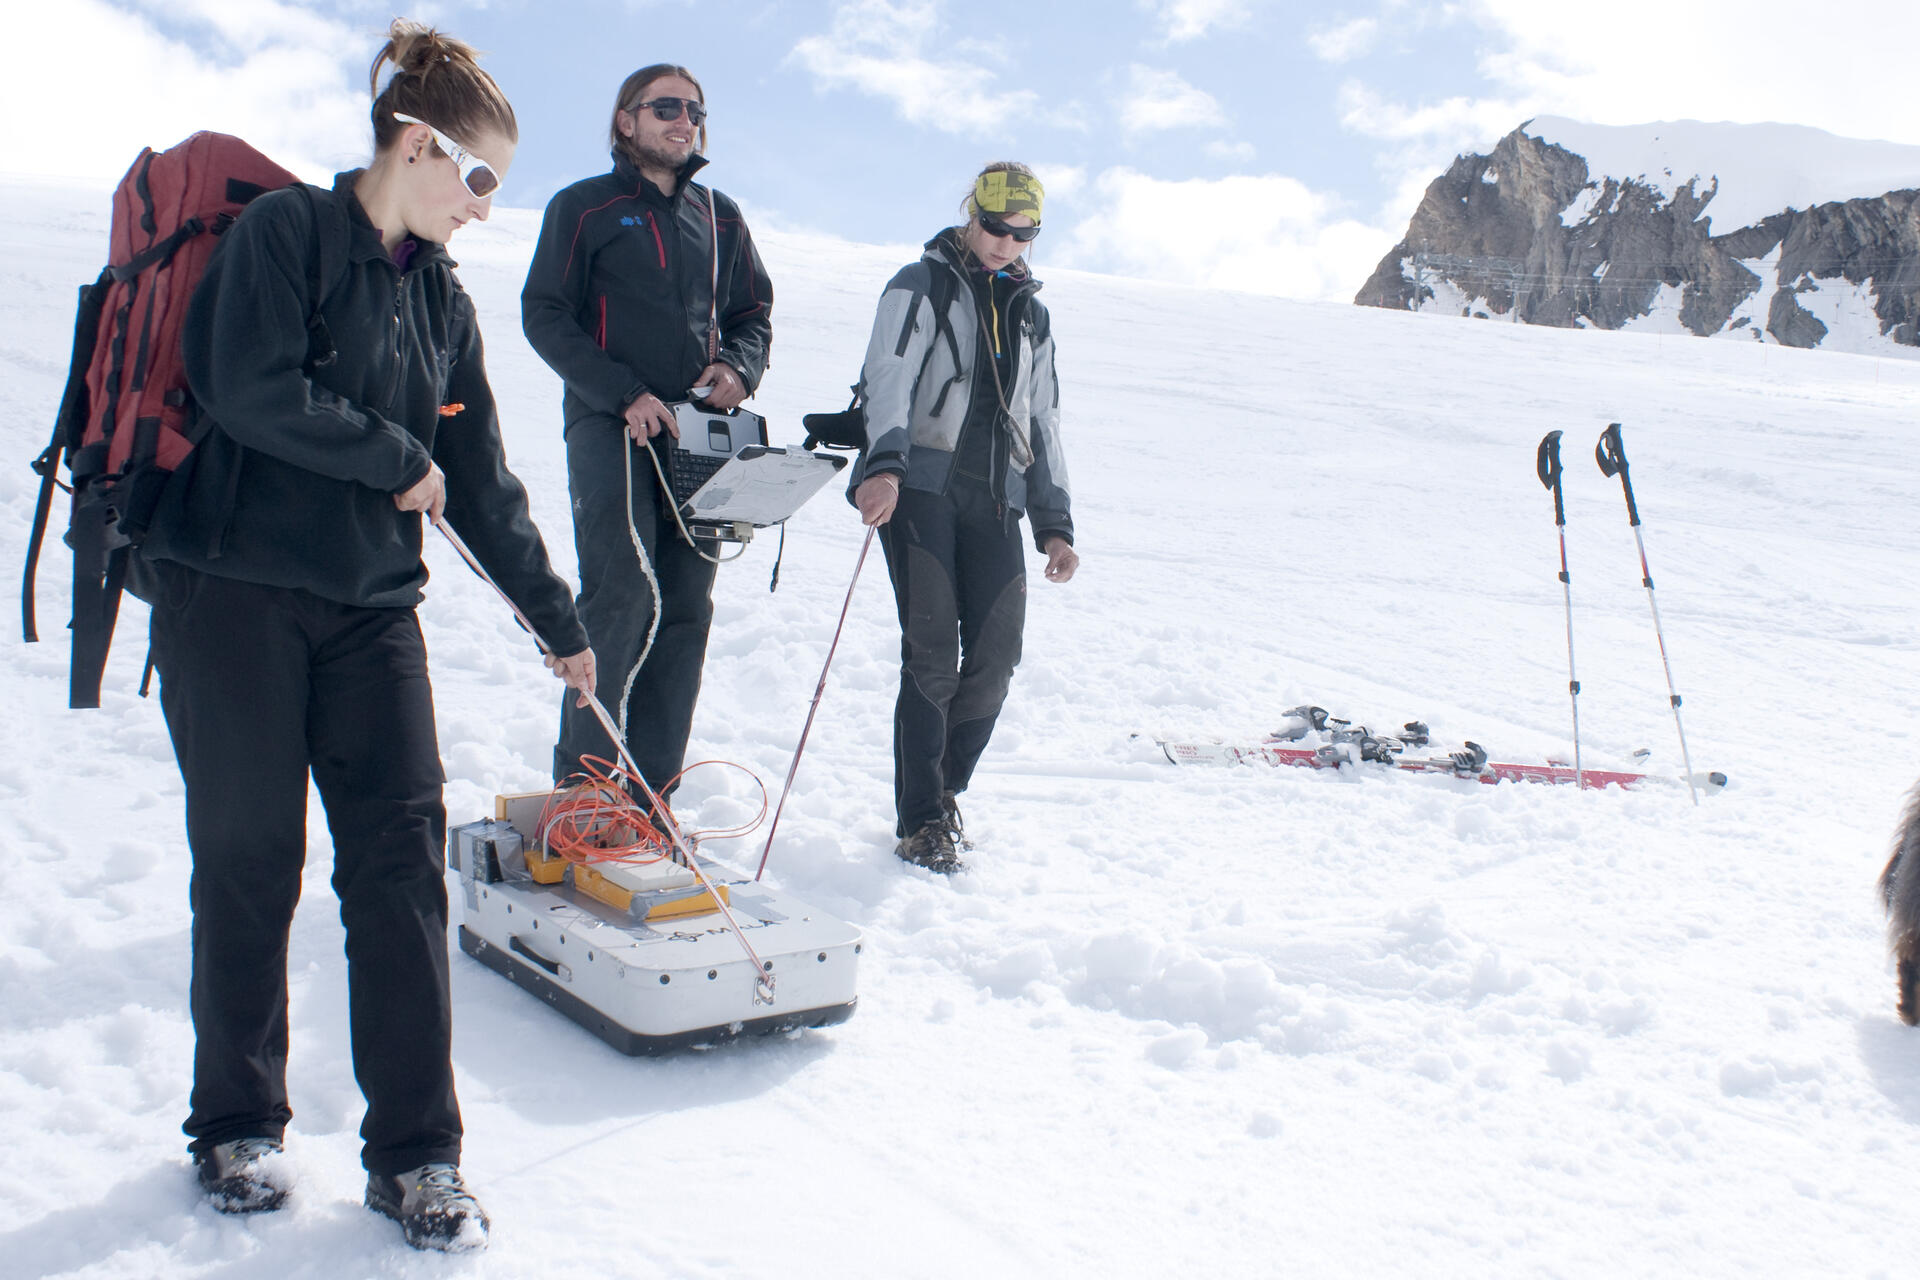 Since 2010, the summit area of the 3203 m high Kitzsteinhorn has been the location of an interdisciplinary open-air lab dedicated to monitoring permafrost as well as landslide activity | © Kitzsteinhorn